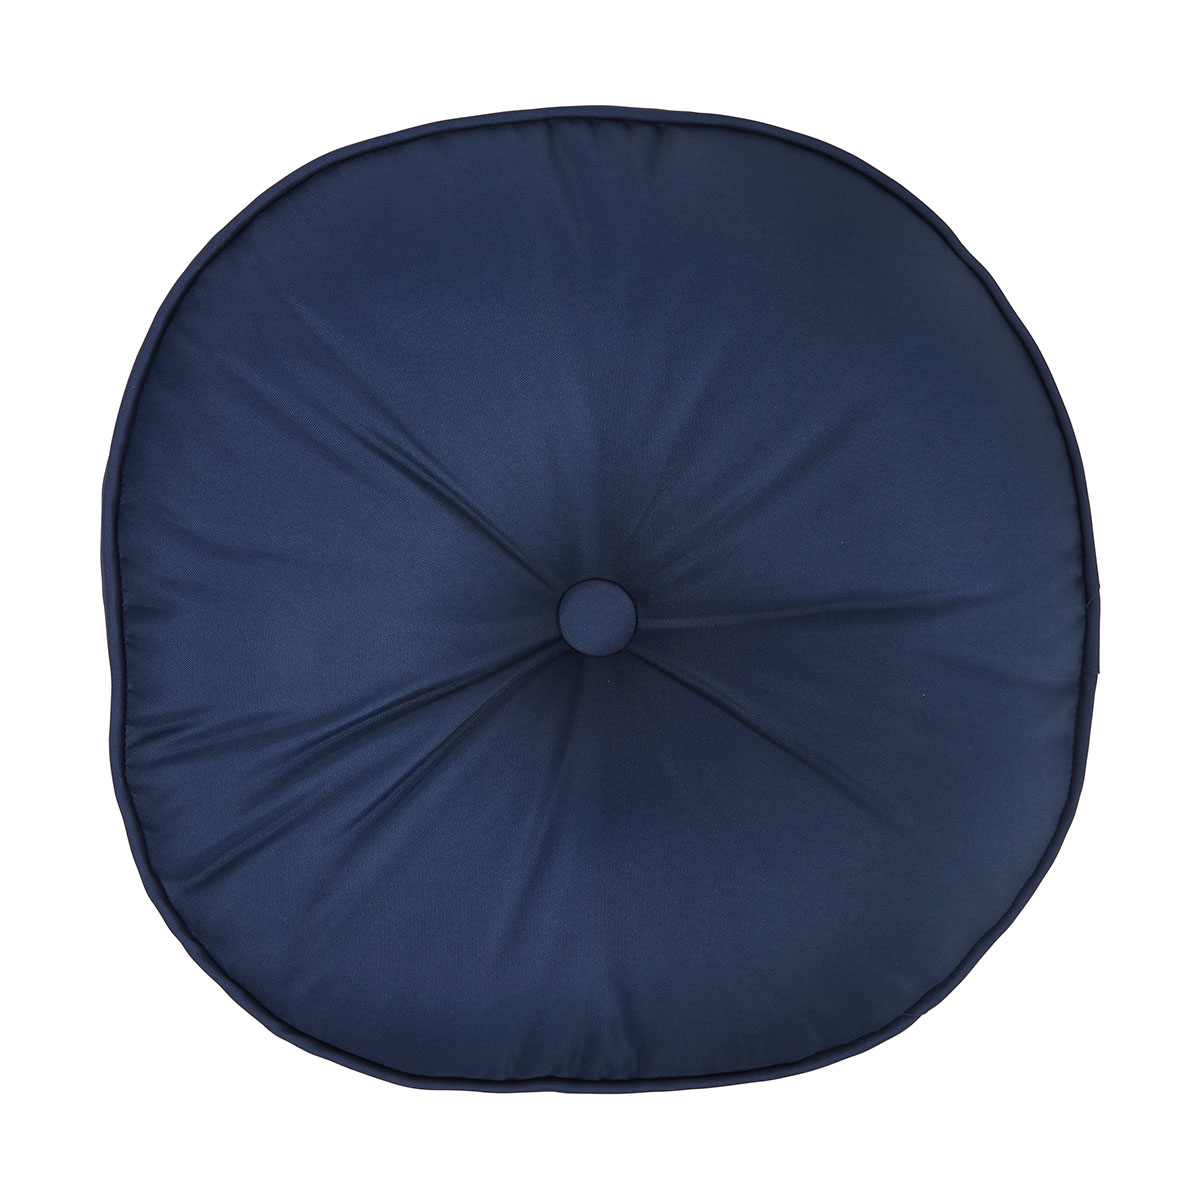  Round Chair Cushions Kmart for Large Space